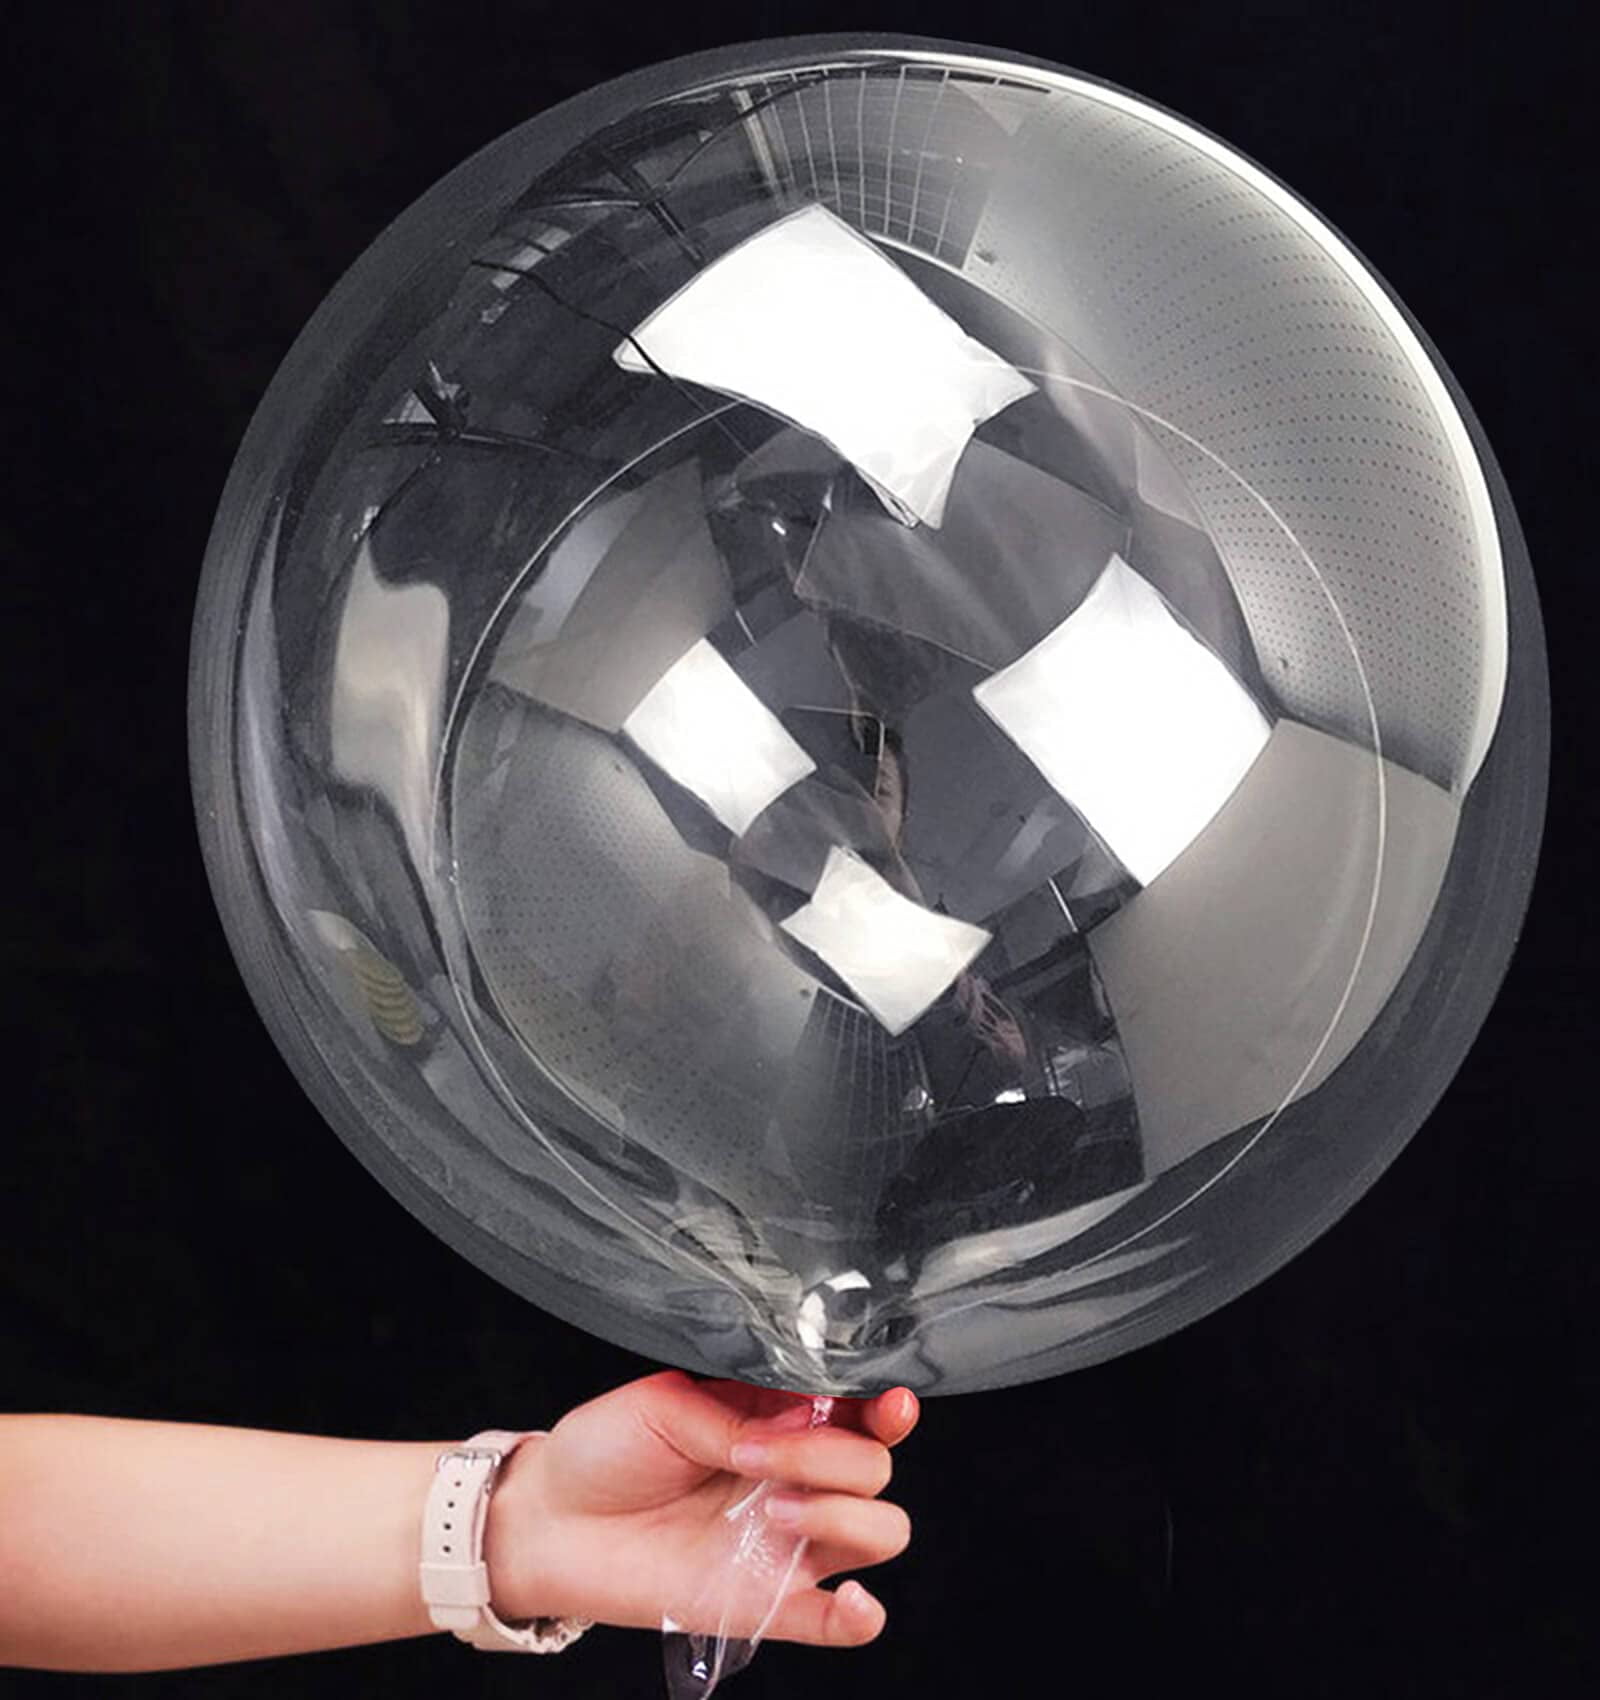 Clear Balloons For Stuffing Transparent Bubble Balloons Big Bubble Balloons  For Christmas Wedding Birthday Party Decoration - AliExpress